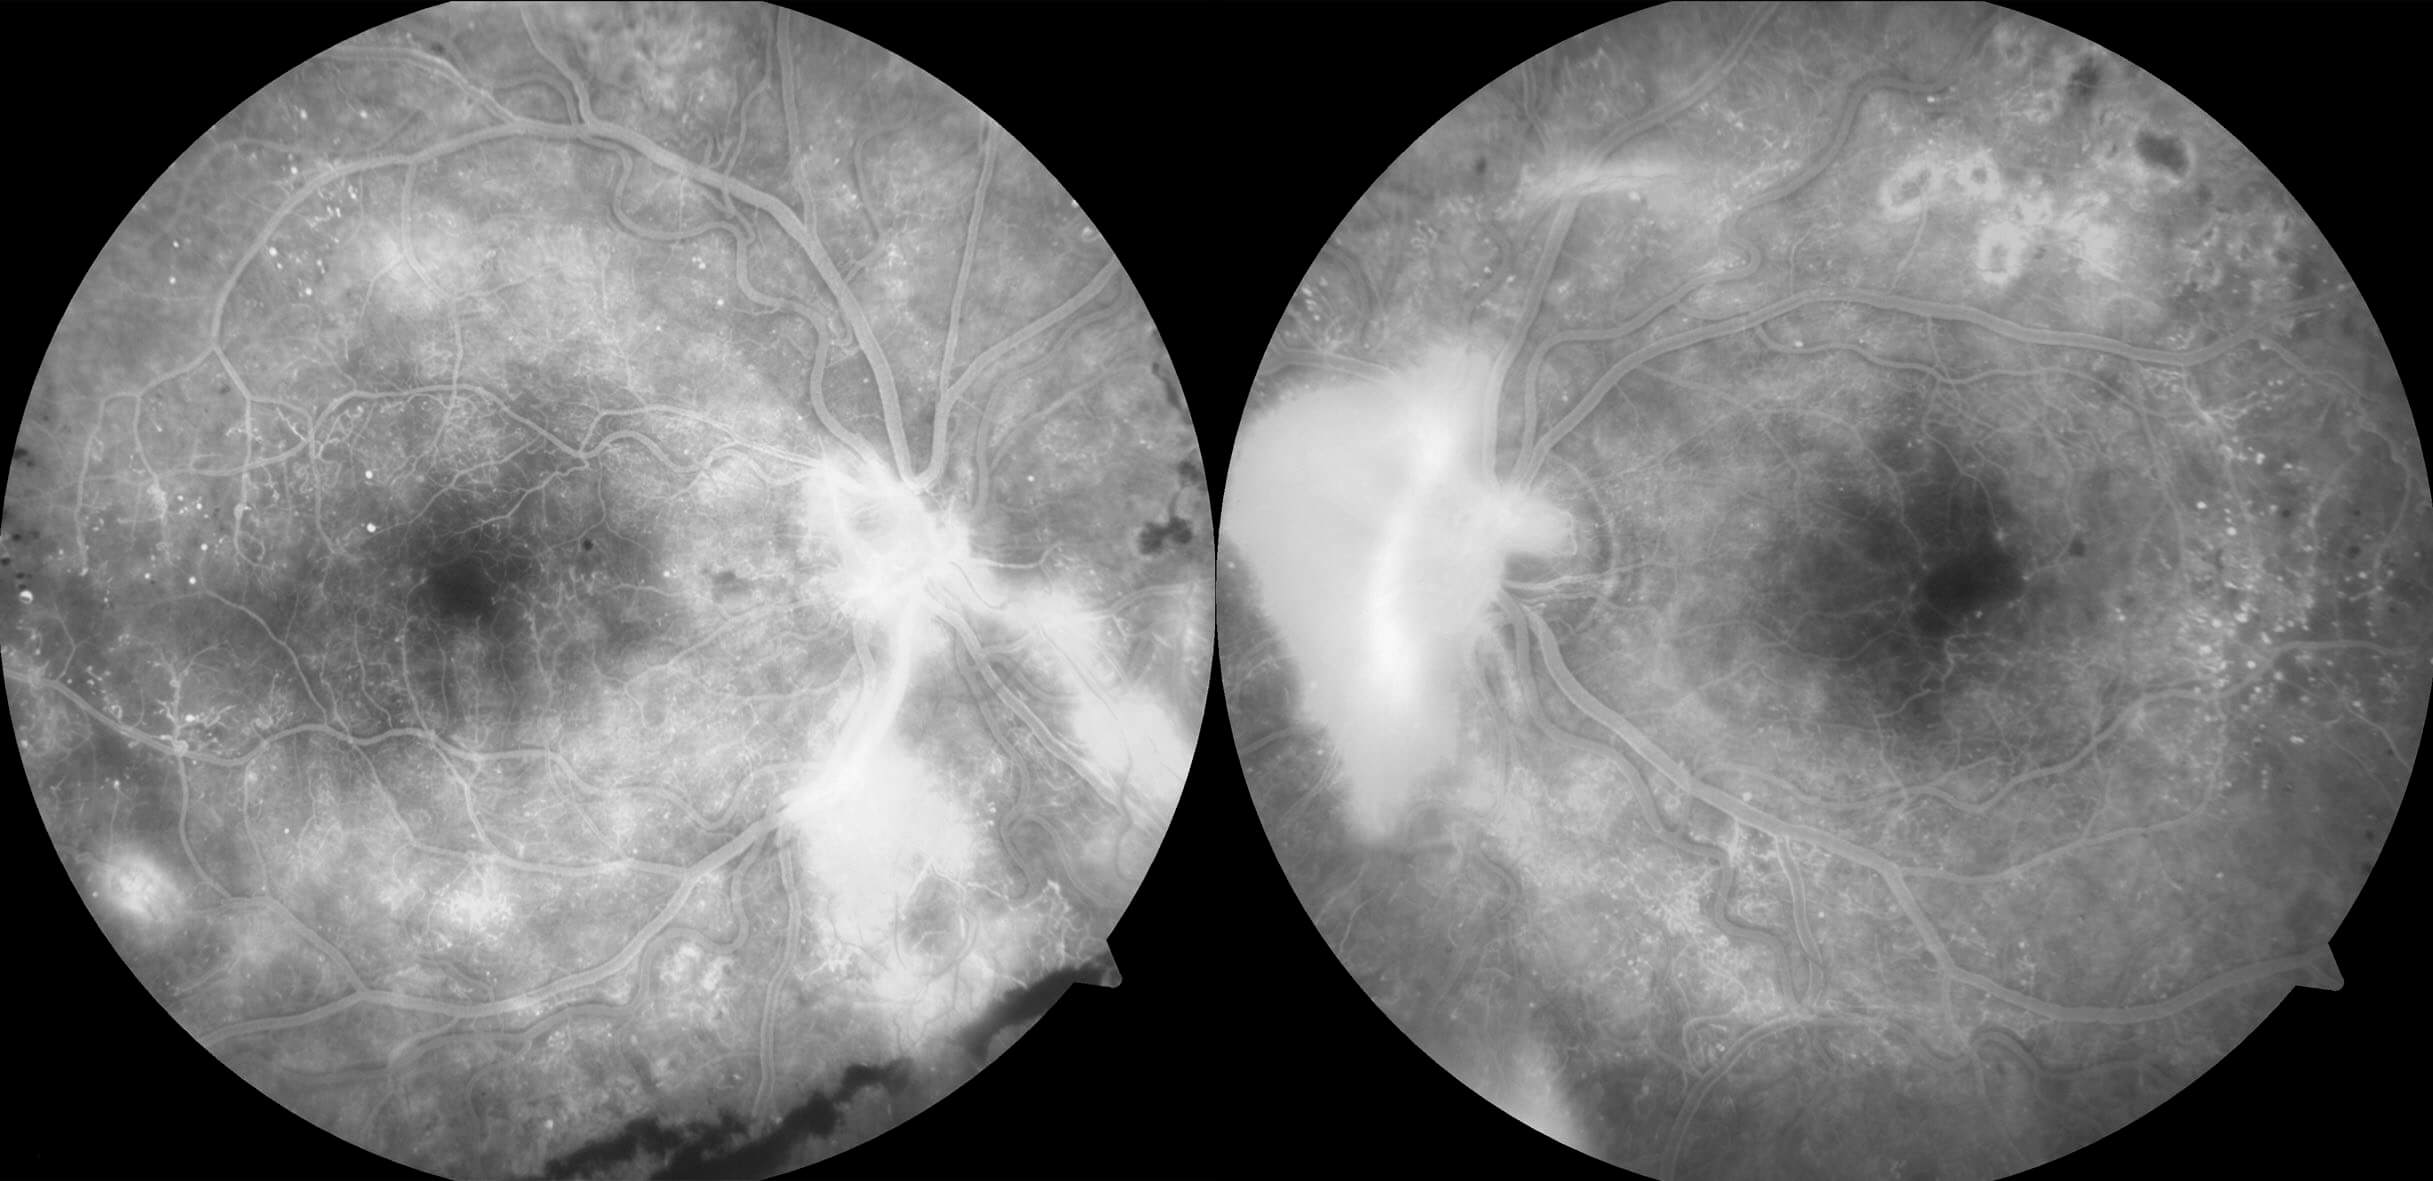 Fundus fluorescein angiography shows hyperfluorescent leakage from new vessels at both optic discs and along the right inferotemporal vascular arcade. Hyperfluorescent microaneurysms are most prominent temporally where there is capillary dropout. The foveal avascular zones of both eyes are irregular. Blocked fluorescence from pre-retinal hemorrhage is seen inferiorly in the right eye. Panretinal photocoagulation laser marks are seen superotemporally in the left eye.